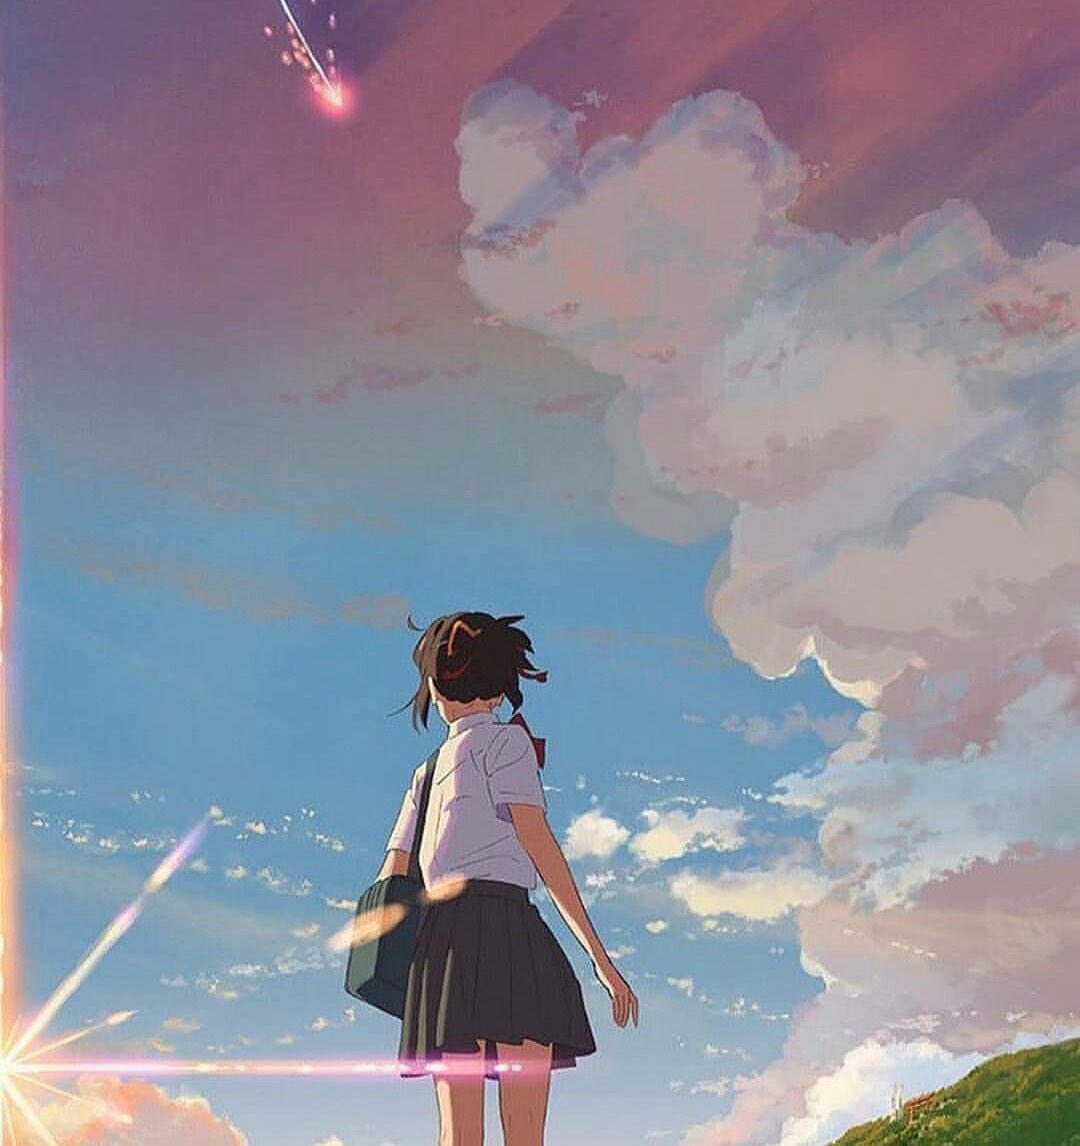 Your Name (2016).